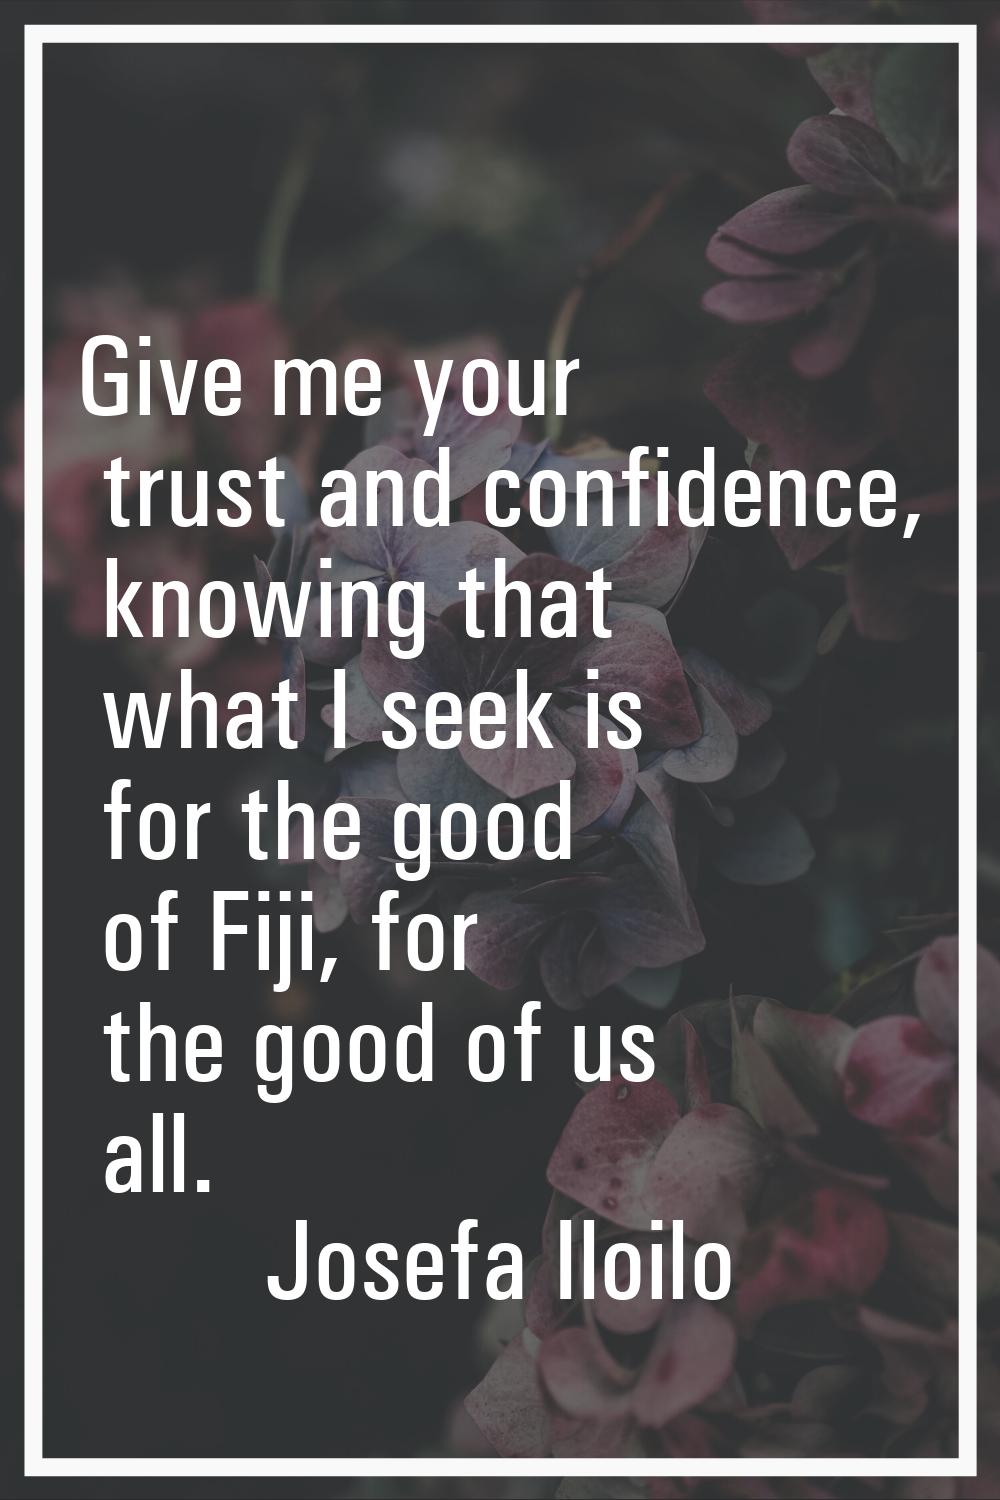 Give me your trust and confidence, knowing that what I seek is for the good of Fiji, for the good o